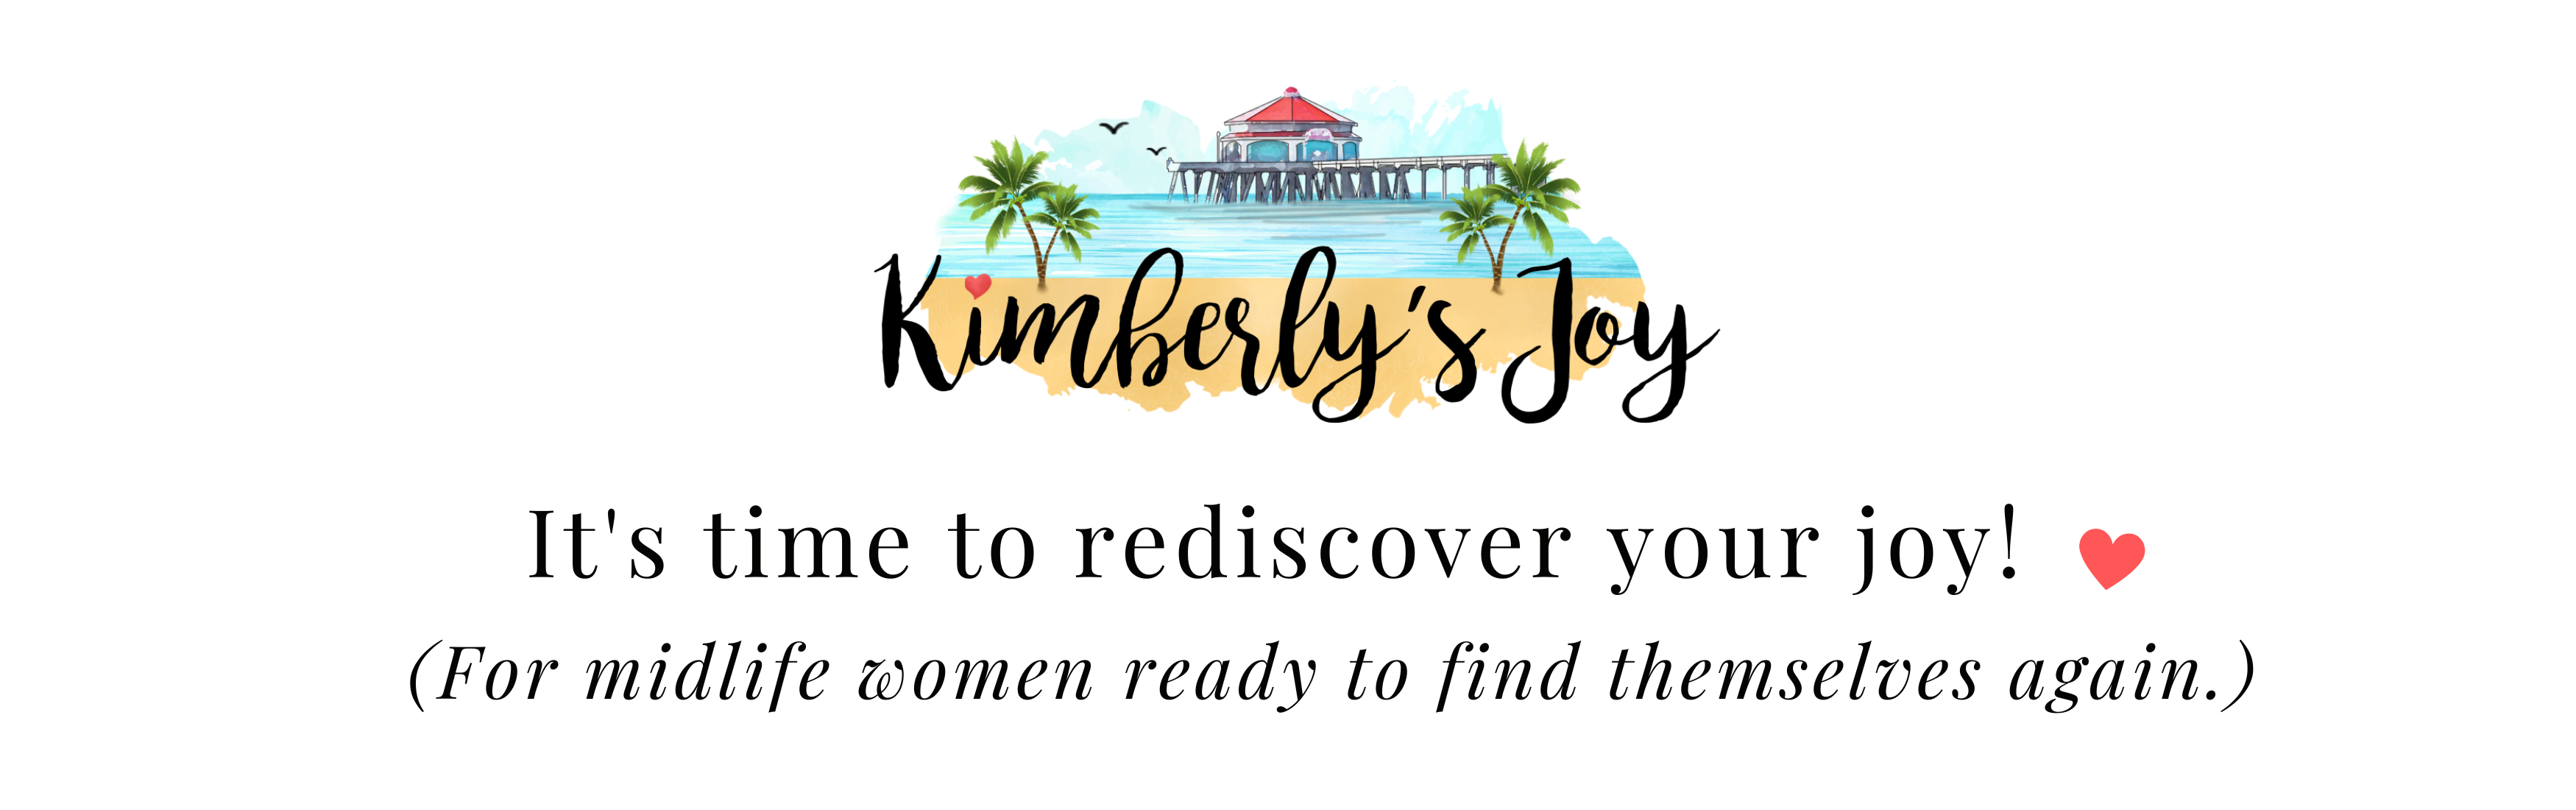 Southern California pier water color drawing with building with red roof, palm trees, and the beach with the words Kimberly's Joy over the top. Kimberlysjoy.com logo.